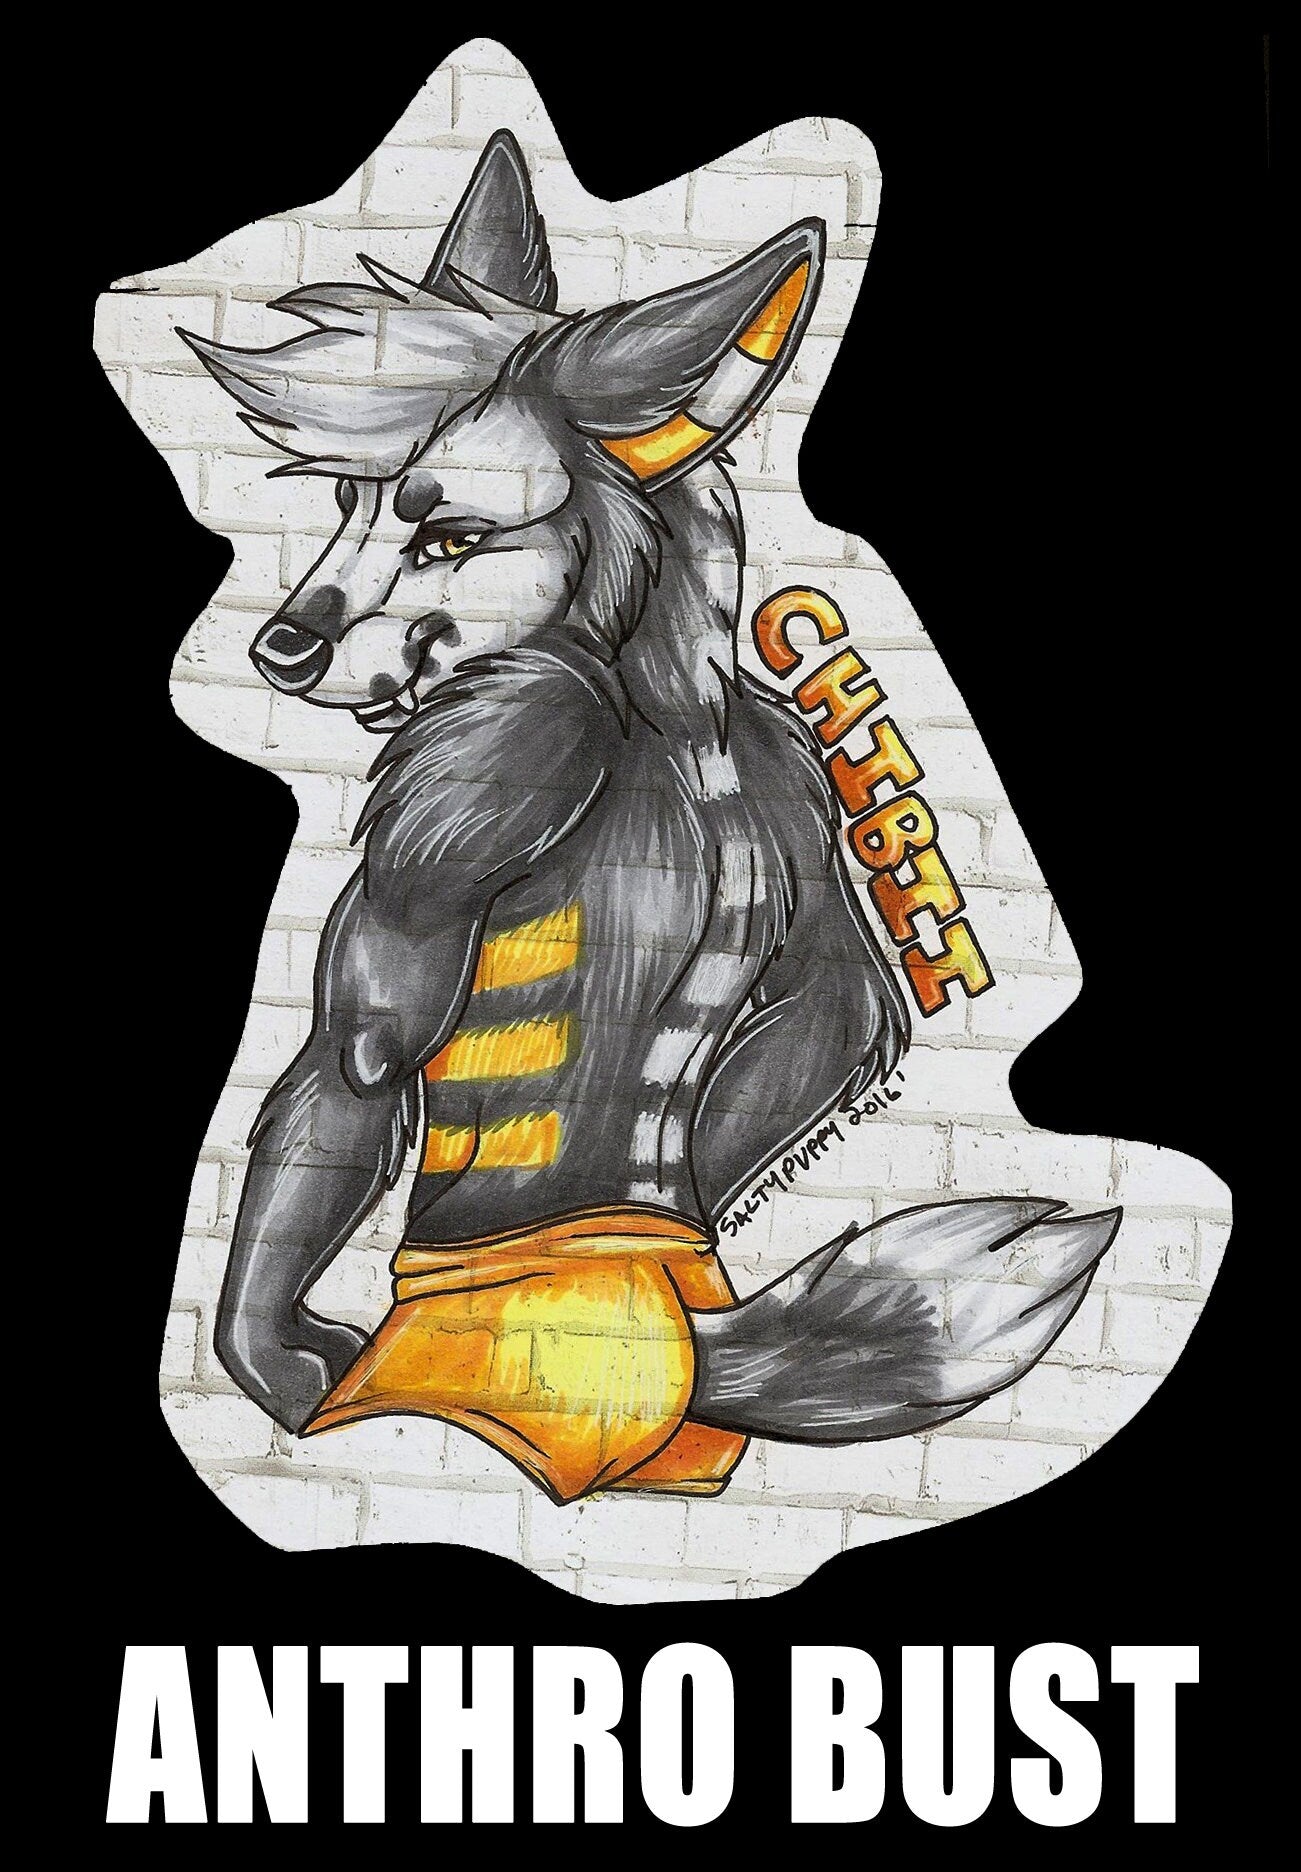 Custom Fursuit Character Badge or Artwork! Laminated and ready to wear!